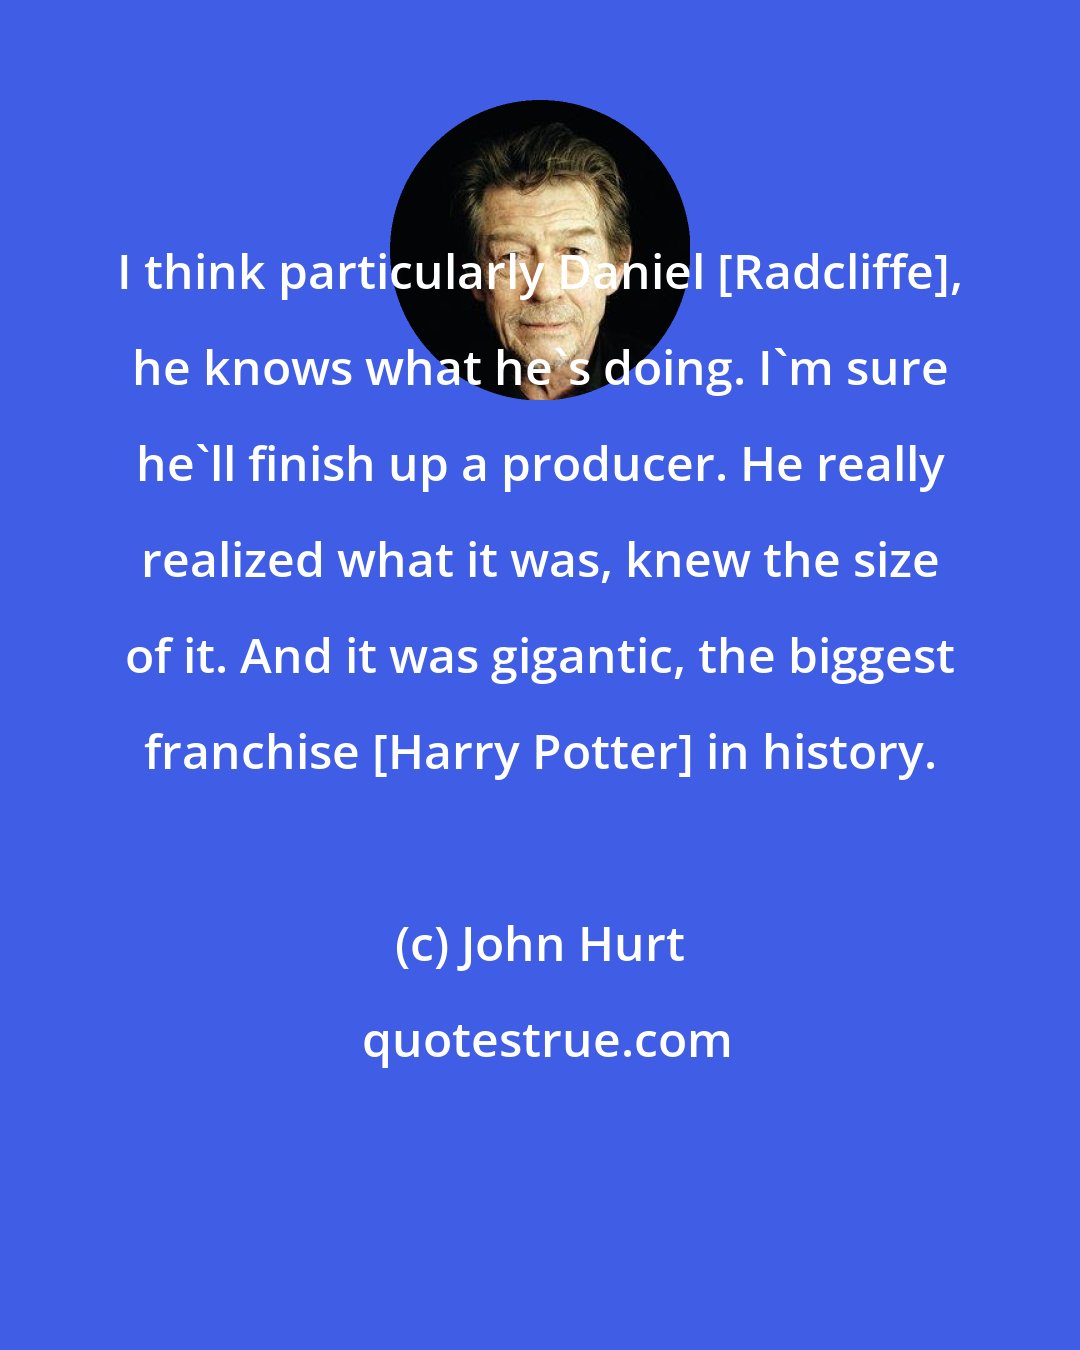 John Hurt: I think particularly Daniel [Radcliffe], he knows what he's doing. I'm sure he'll finish up a producer. He really realized what it was, knew the size of it. And it was gigantic, the biggest franchise [Harry Potter] in history.